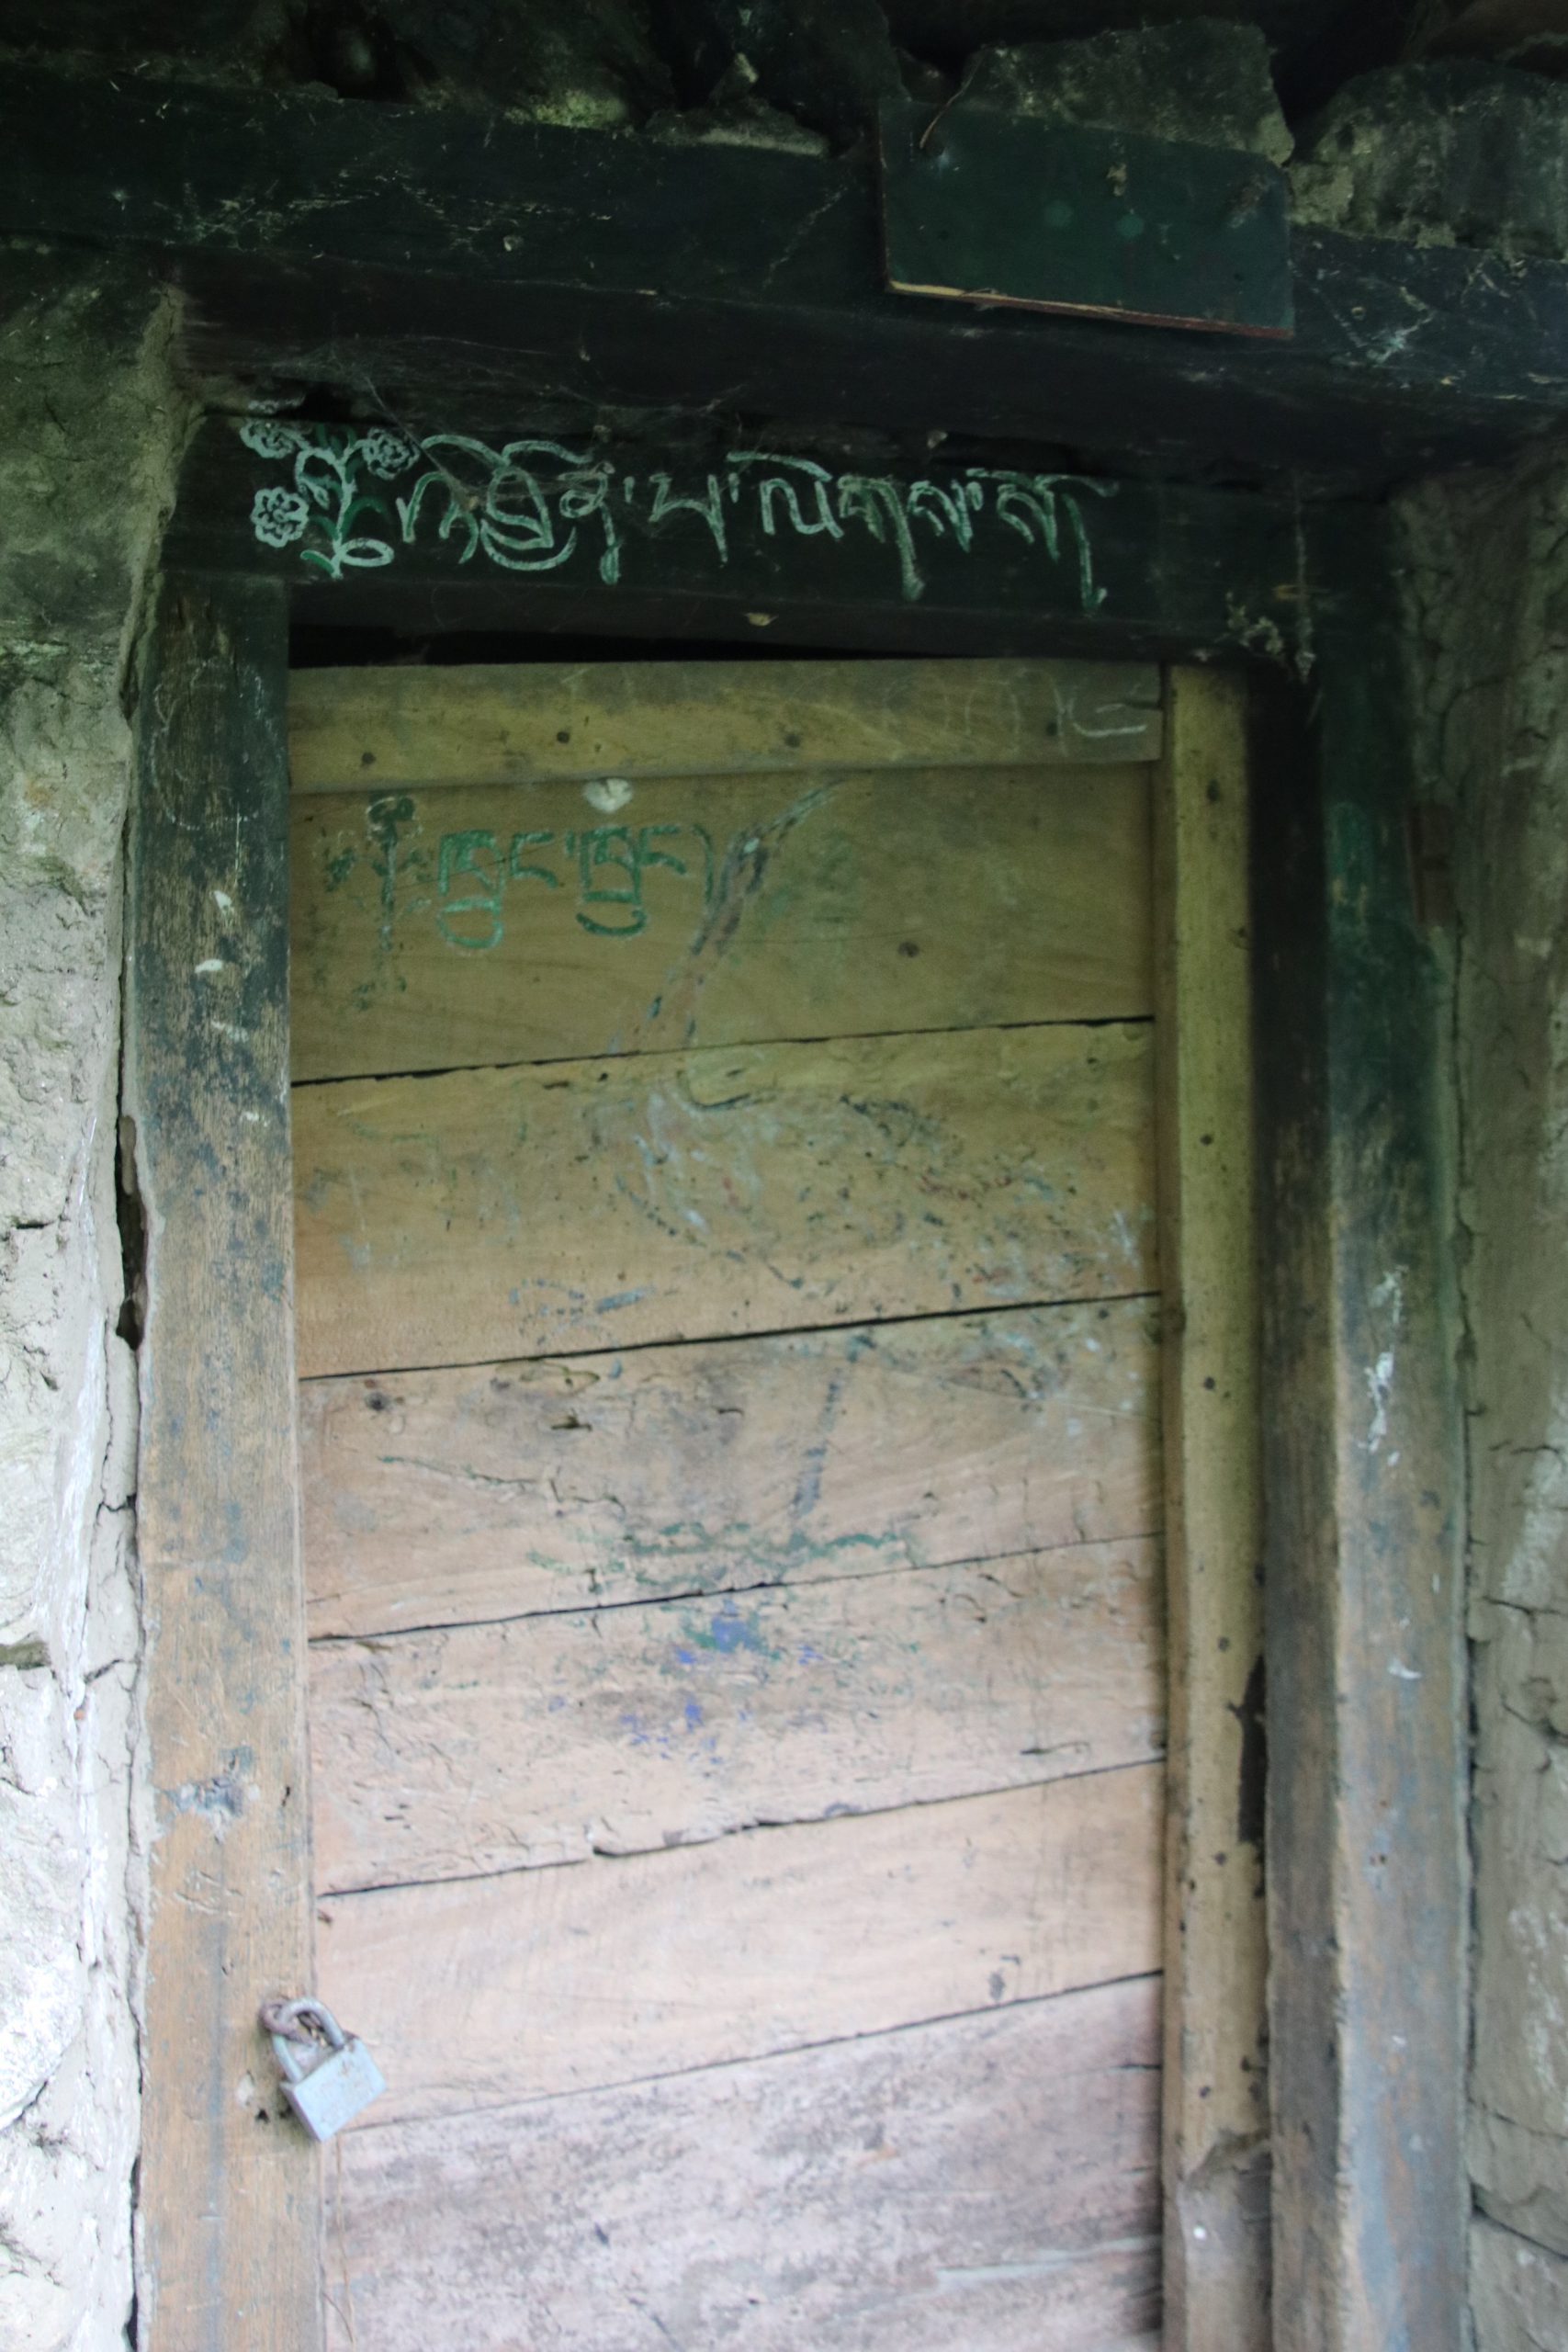 A welcome note written above the door of a house in Shamdoley, Dagana